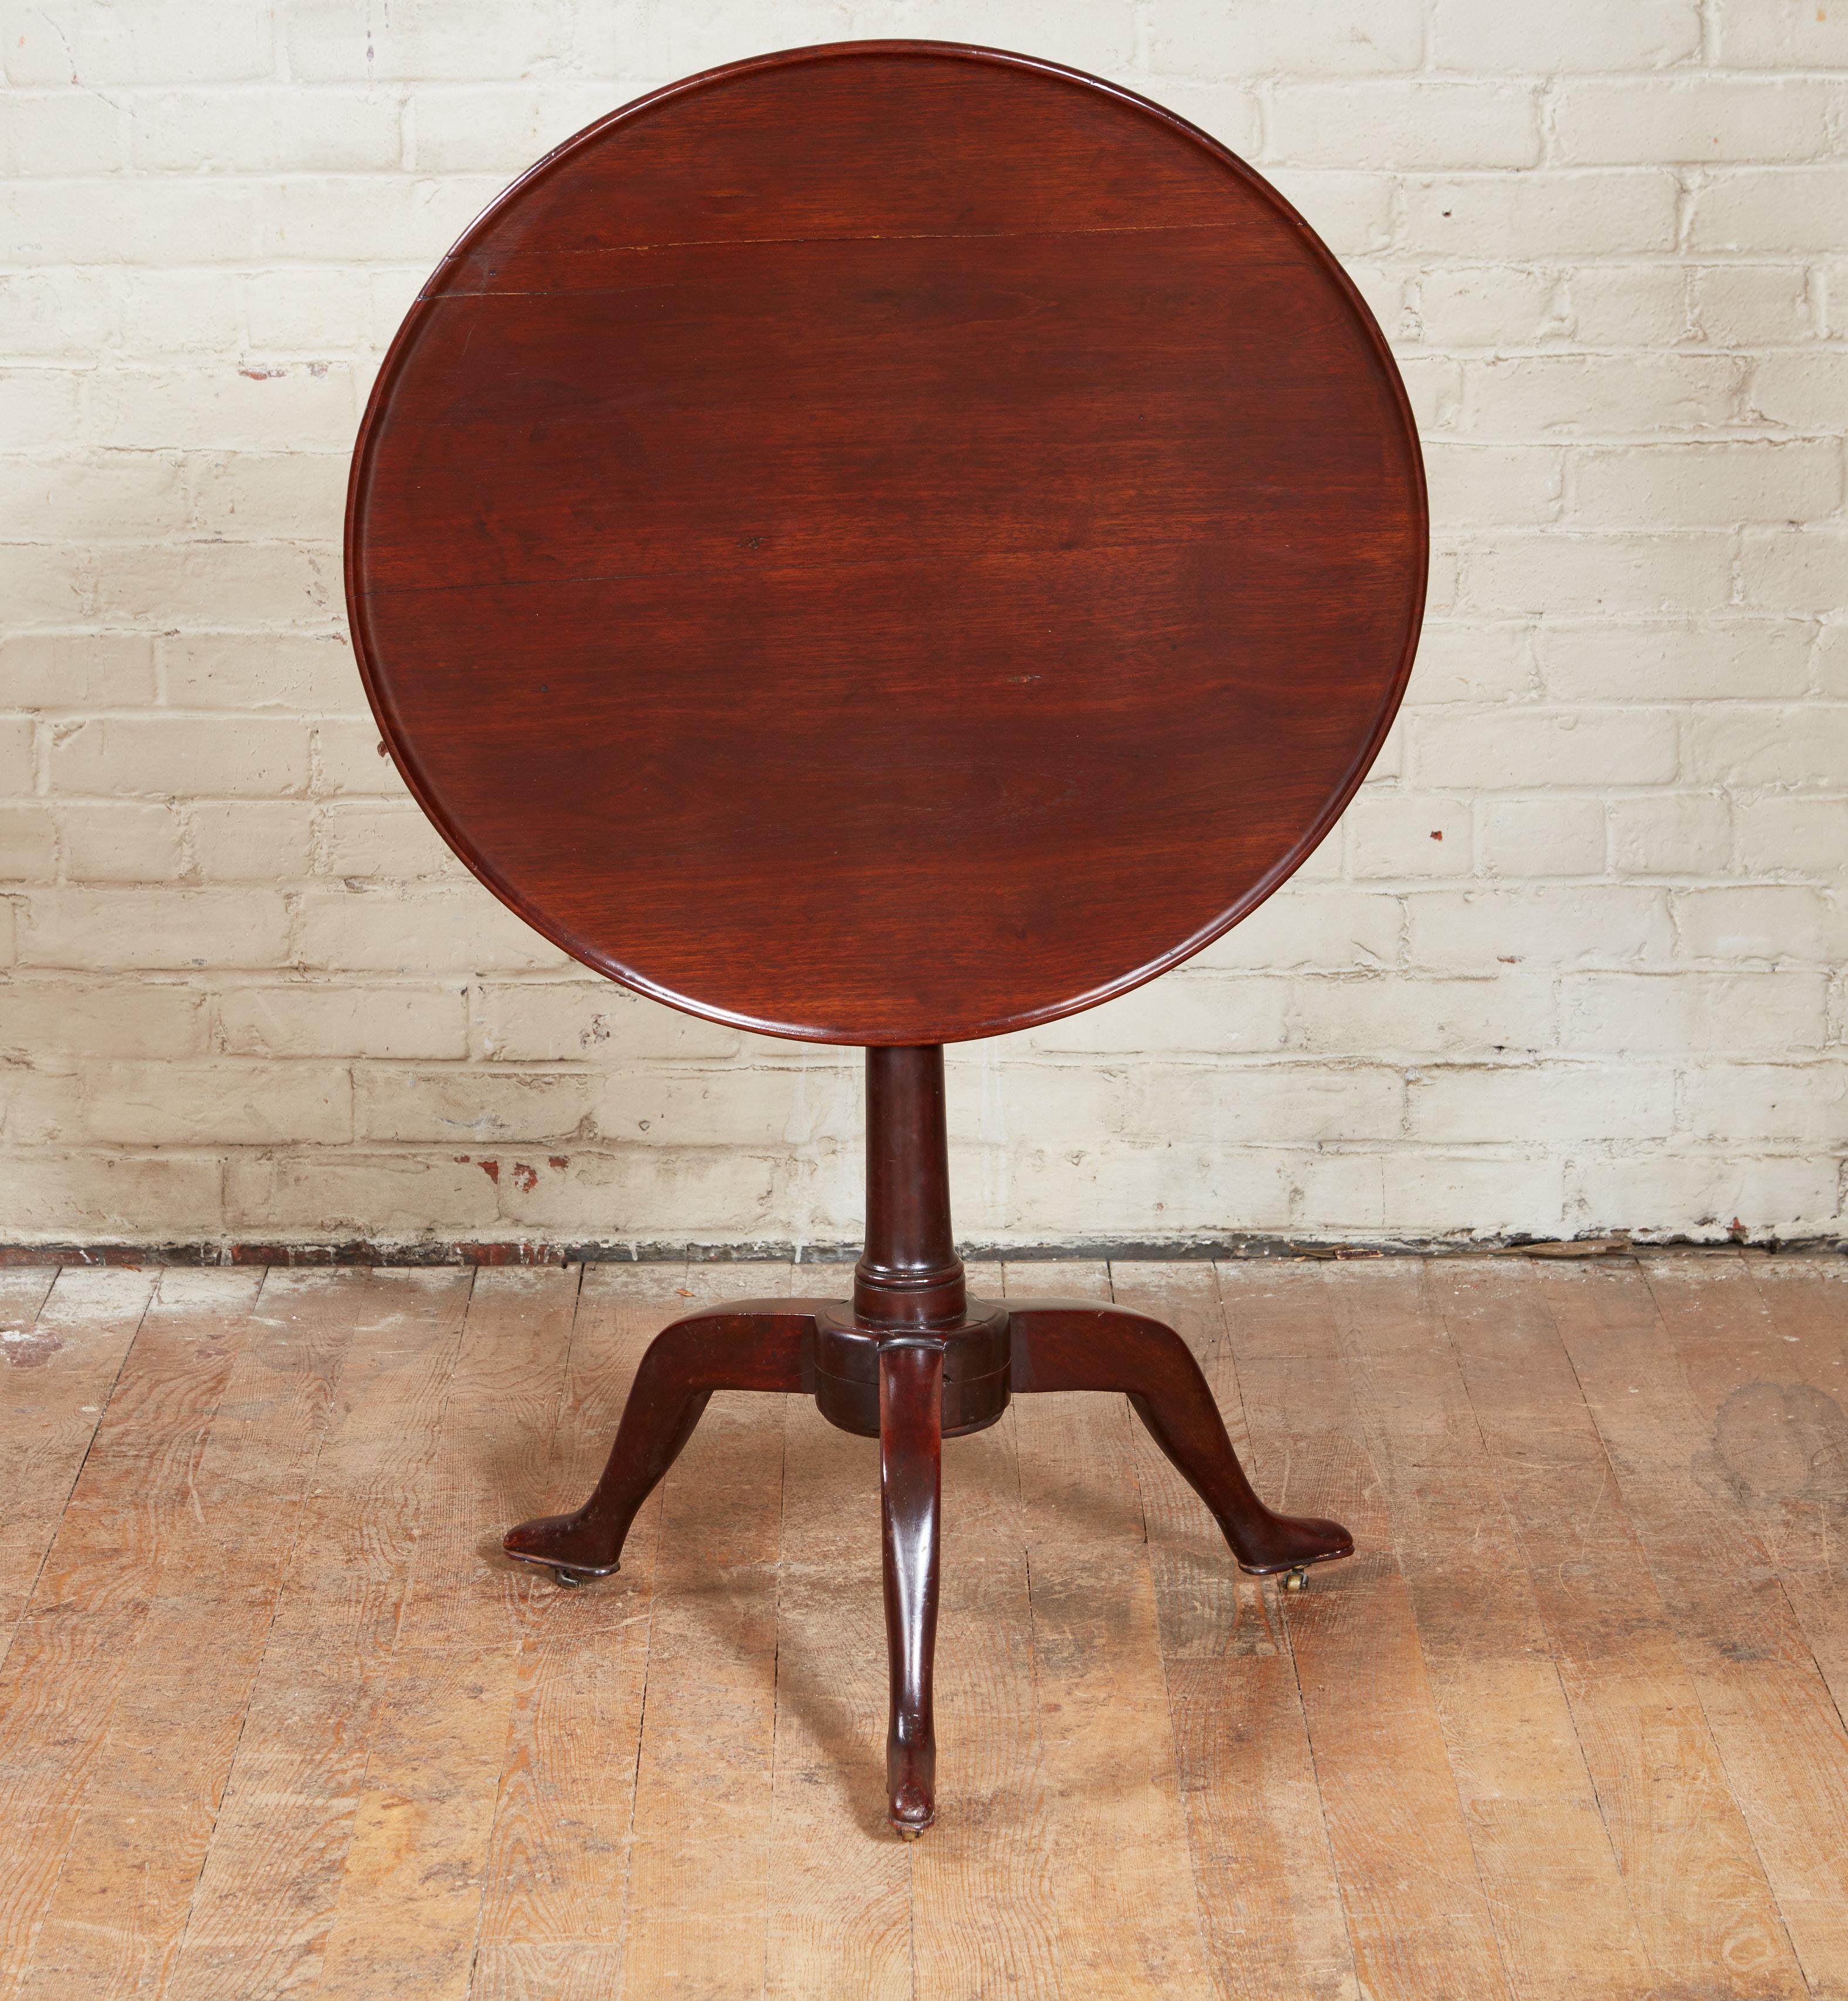 Very fine 18th Century mahogany dish top tripod table by Joseph Gengenbach, known as Canabas, circa 1790, the lathe turned top with dished edge, over very simple column base, standing on three anthropomorphic feet and retaining original (and worn